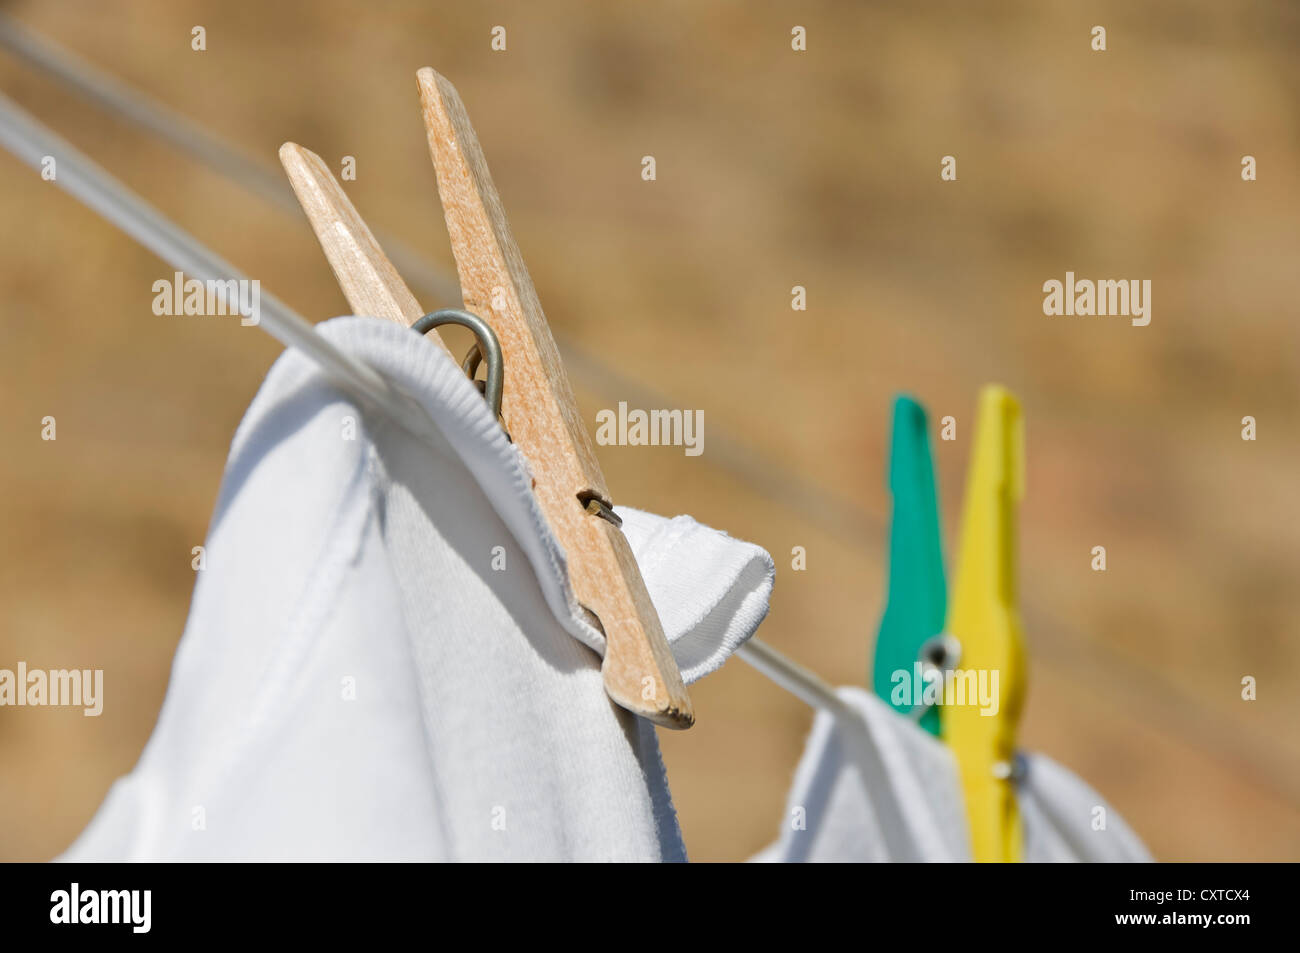 Close up of wooden and plastic clothes pegs peg on washing line England UK United Kingdom GB Great Britain Stock Photo